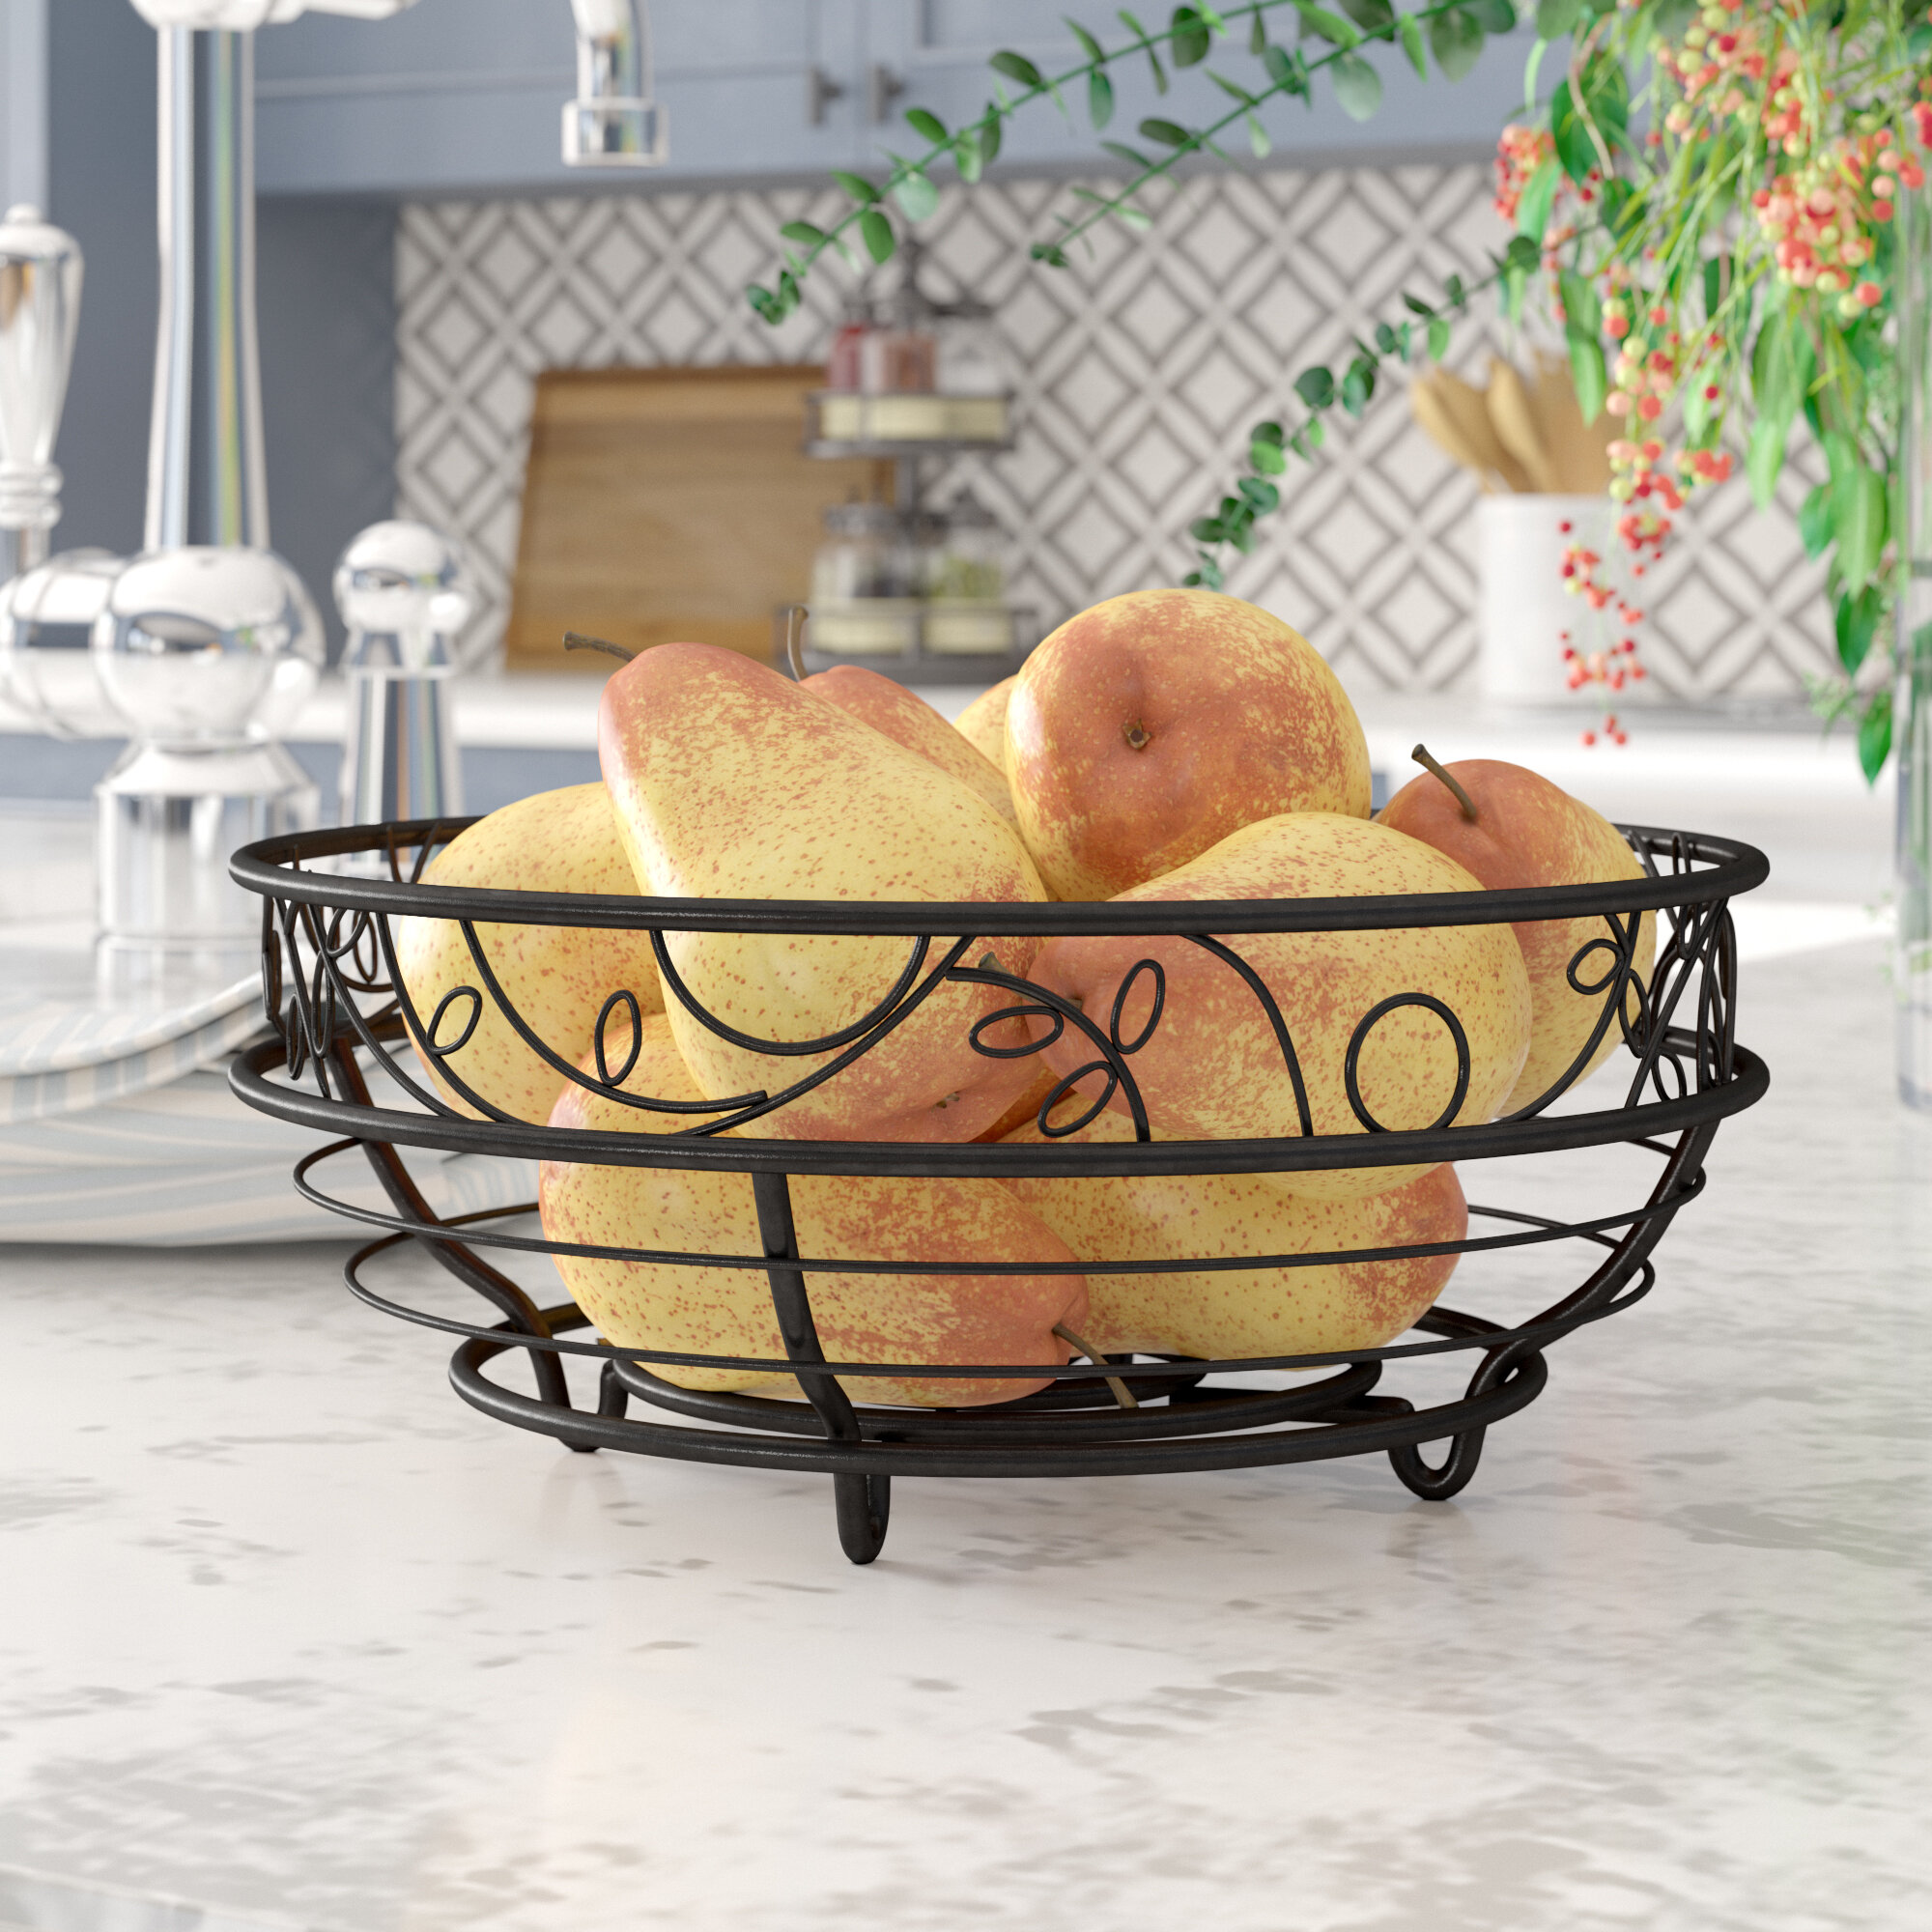 The Twillery Co Augustine Kitchen Countertops Fruit Basket